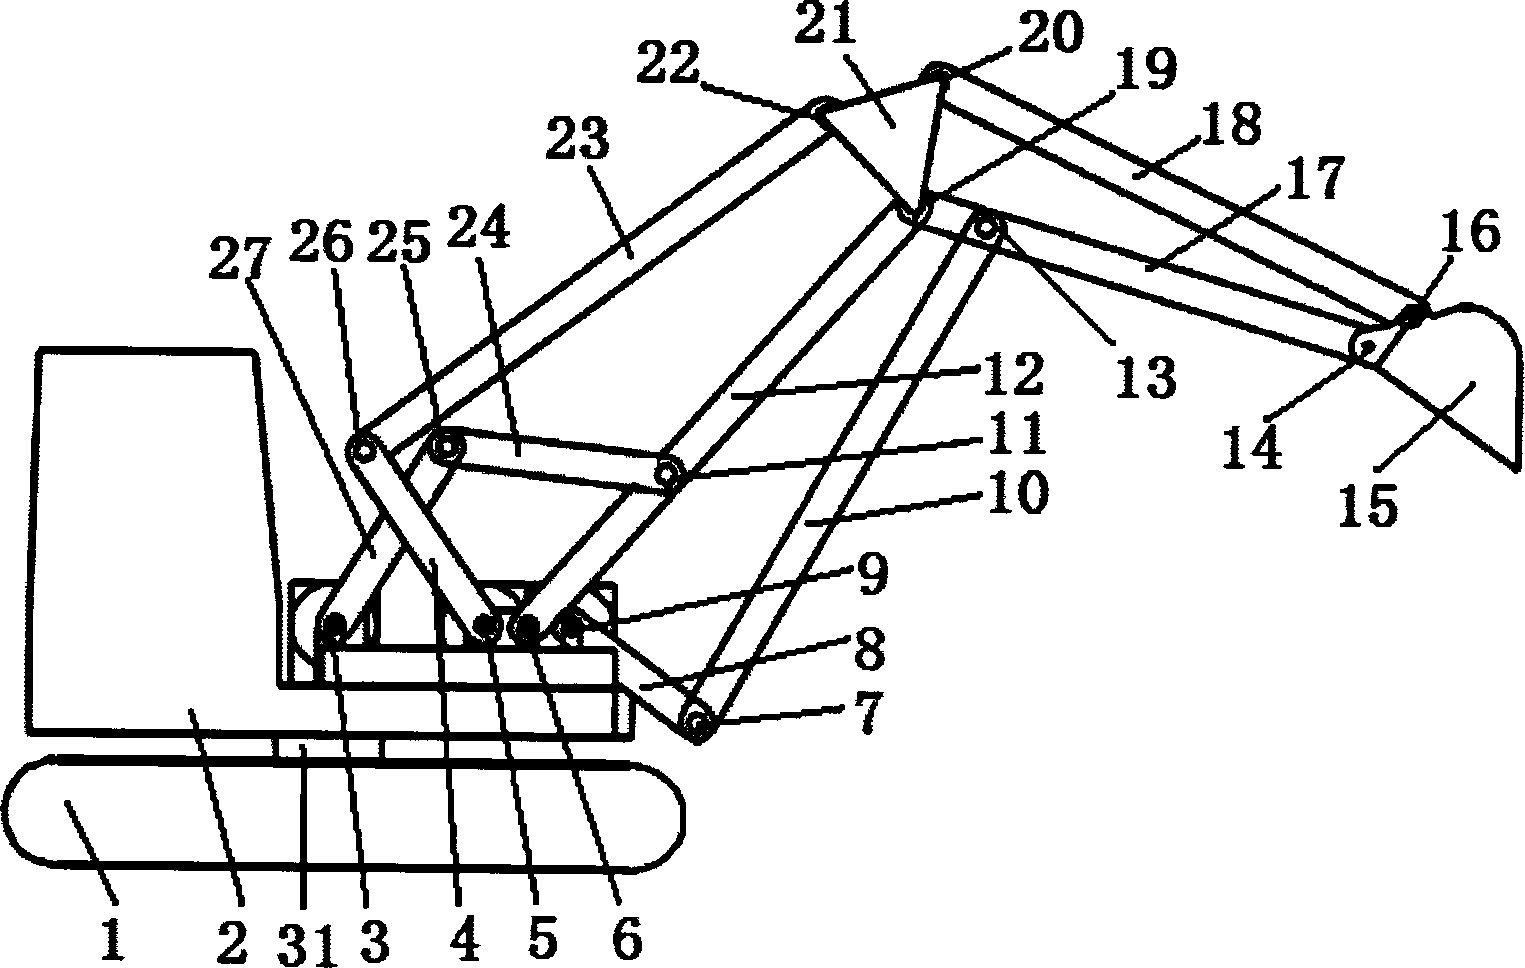 A three-degree-of-freedom controllable mechanism excavator